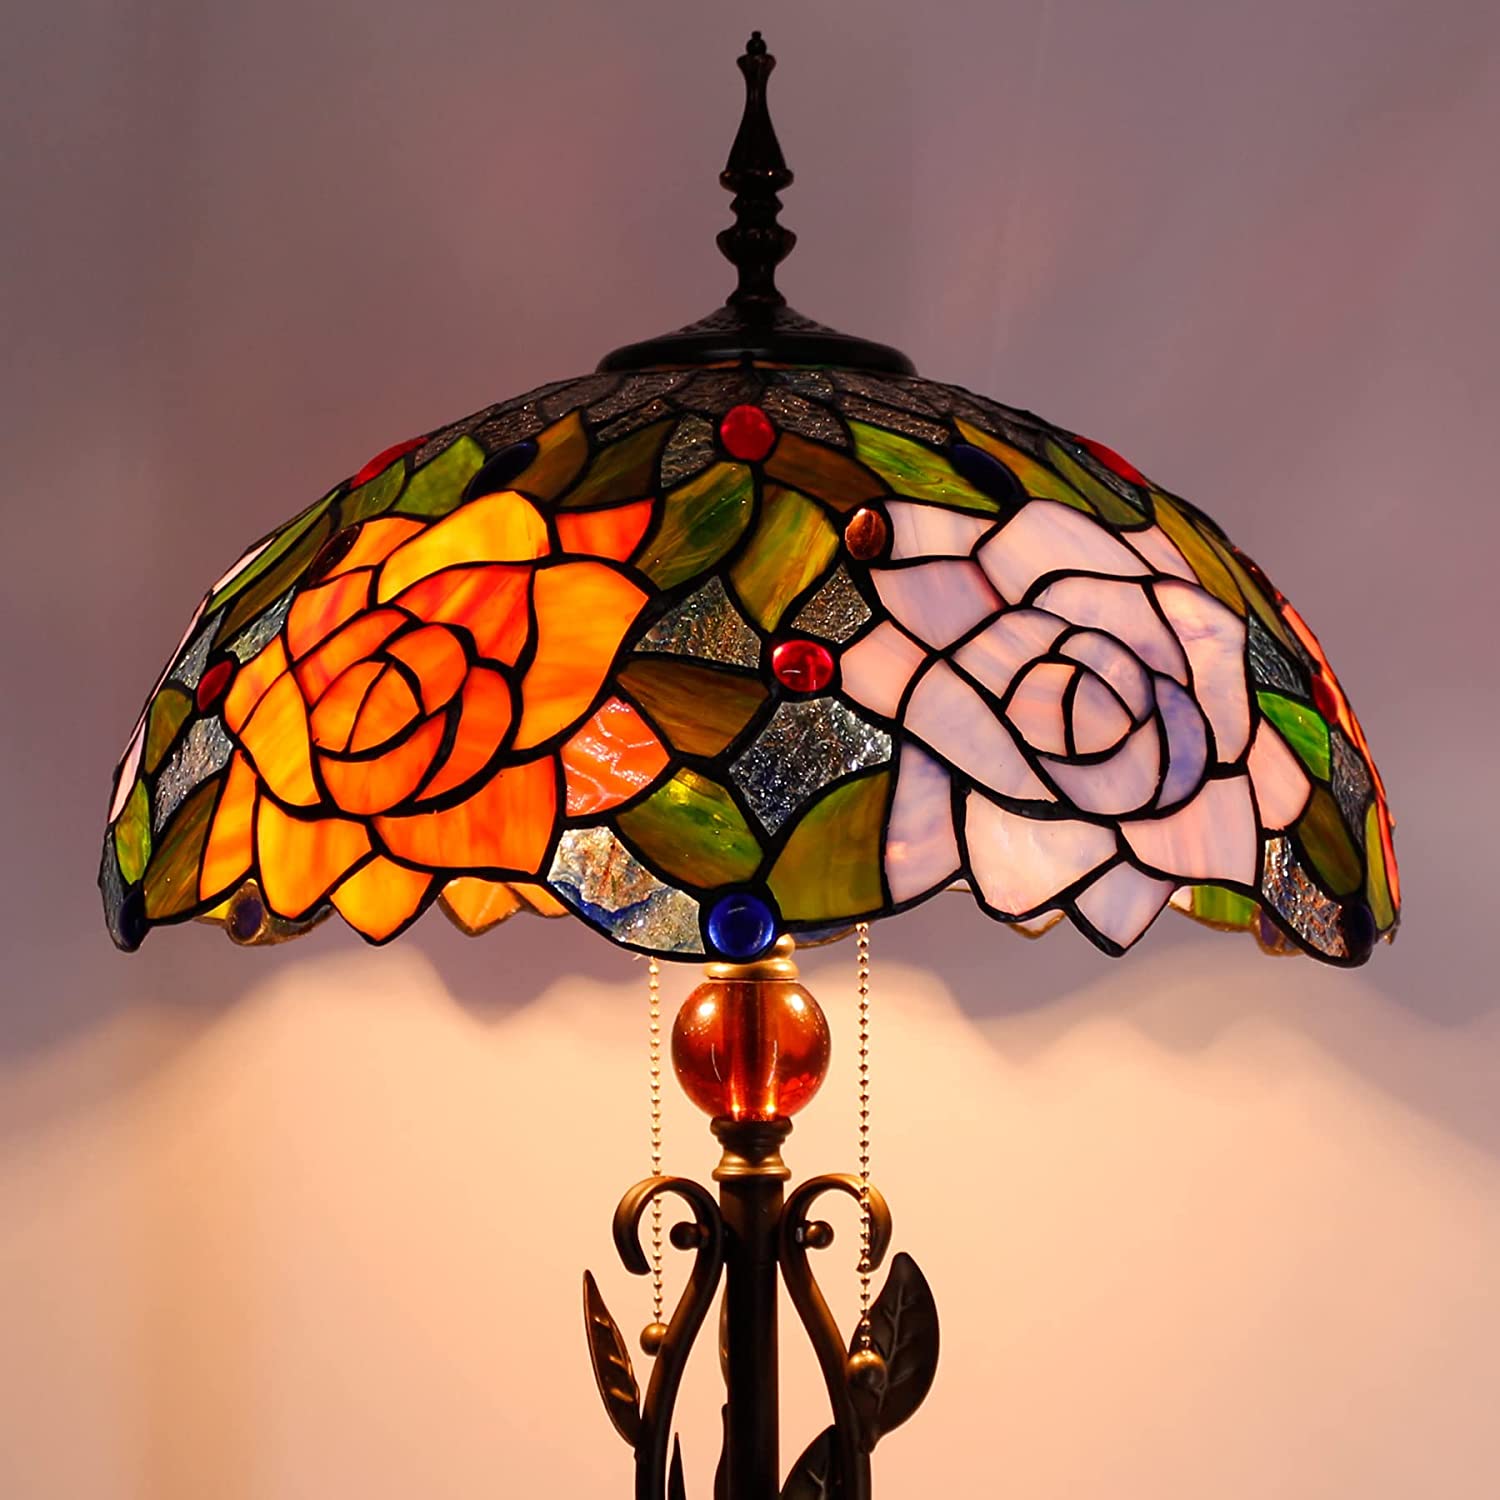 Werfactory® Tiffany Floor Lamp Red Rose Stained Glass Floor Lamp Tiffany Standing Lamp